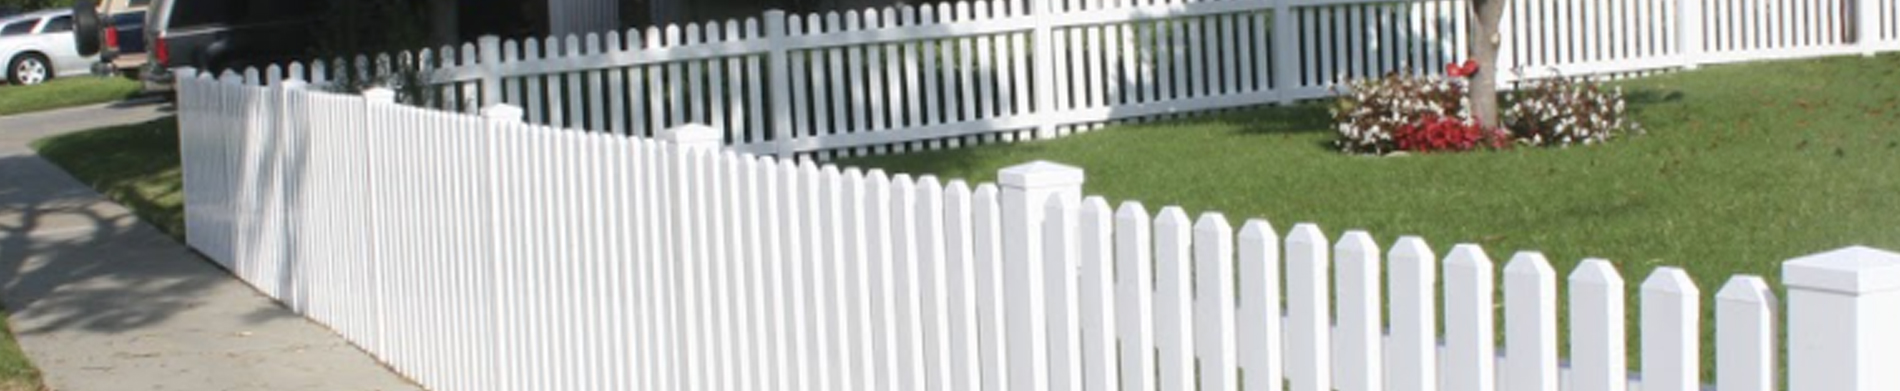 Why repair an old fence when you can install a durable vinyl fence panel?